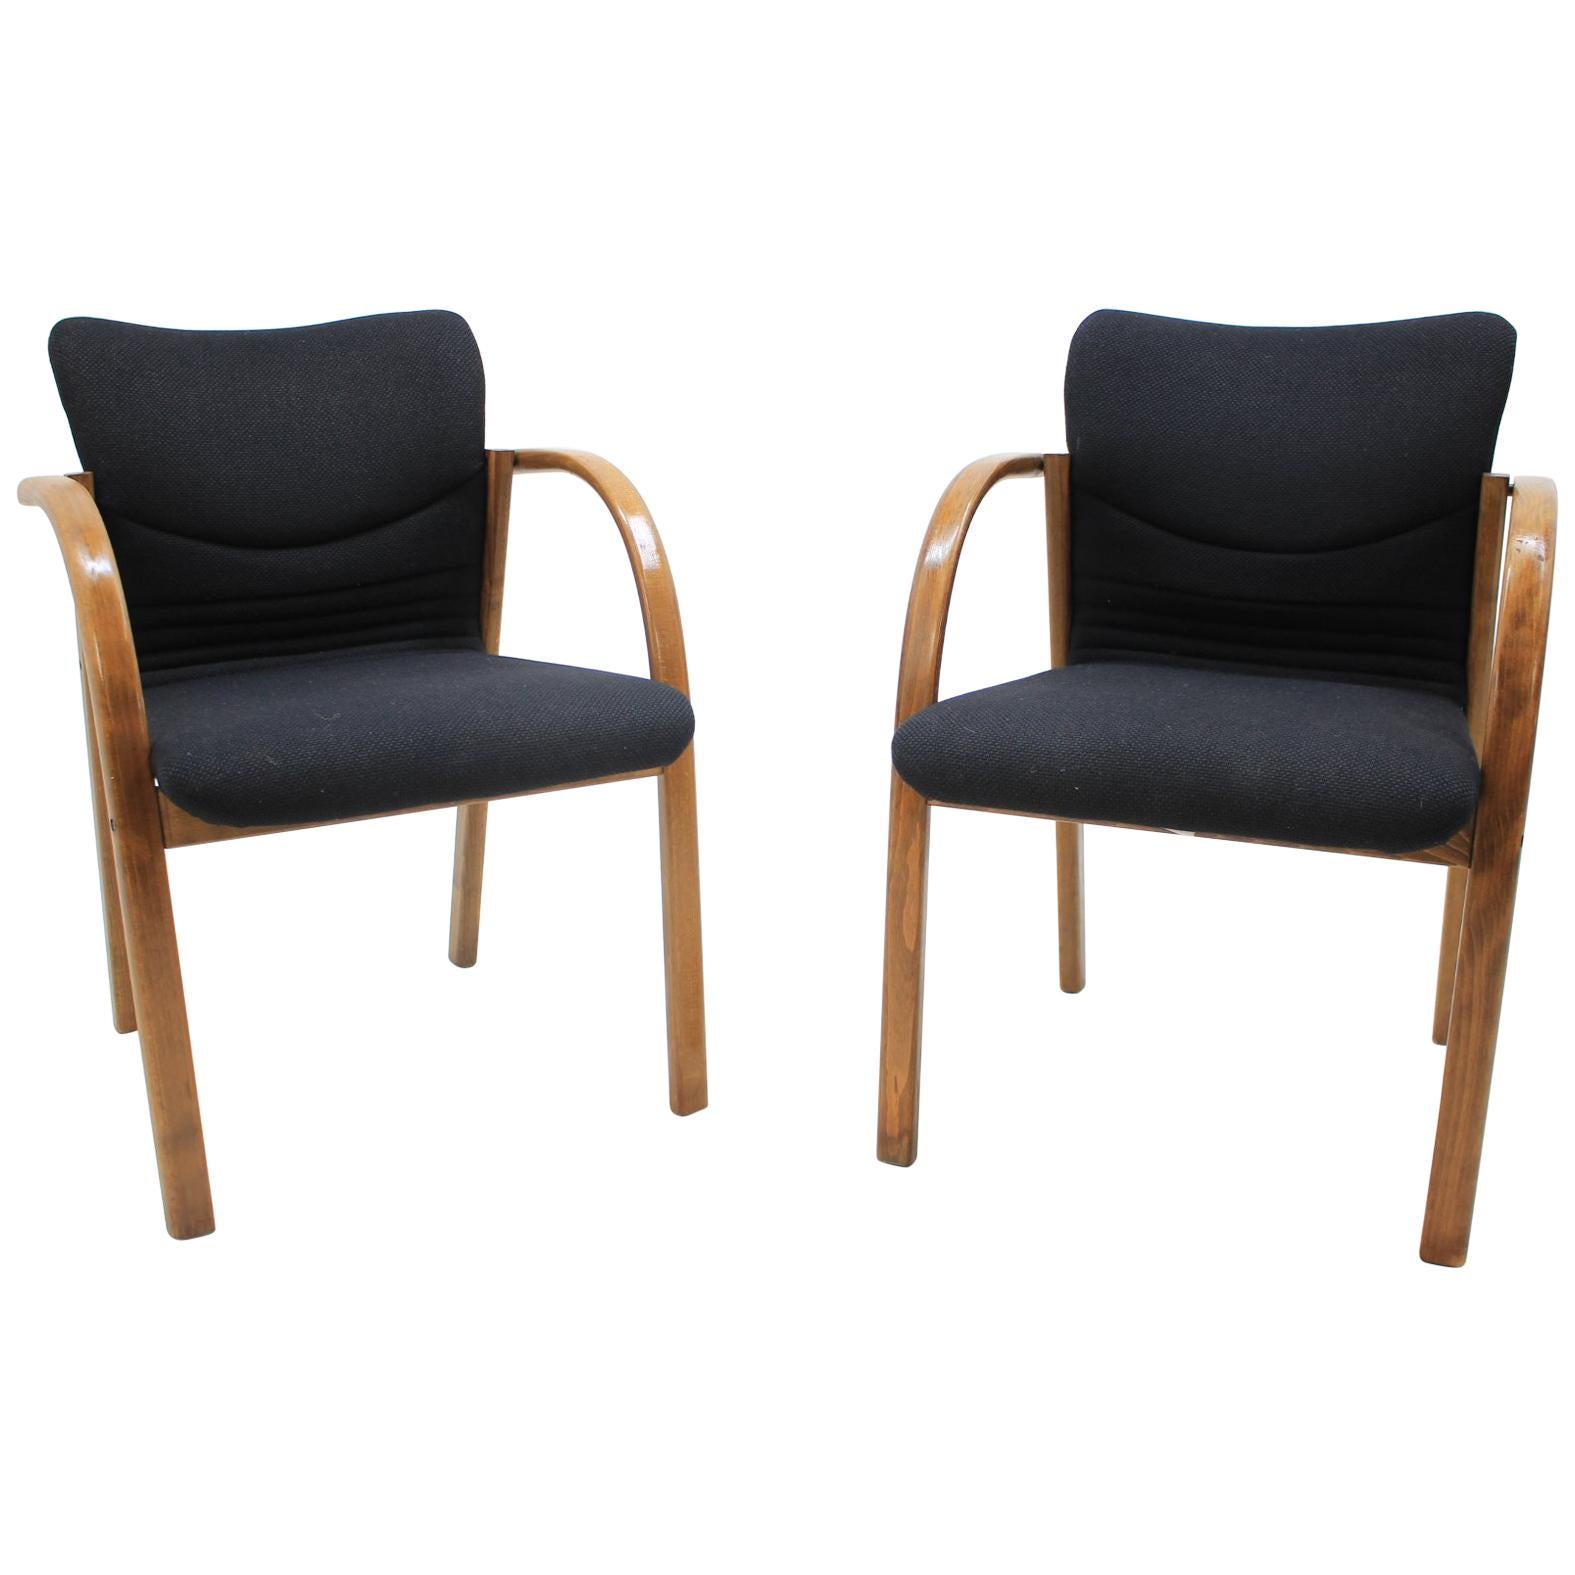 Pair of Design Office / Chairs, 1980s